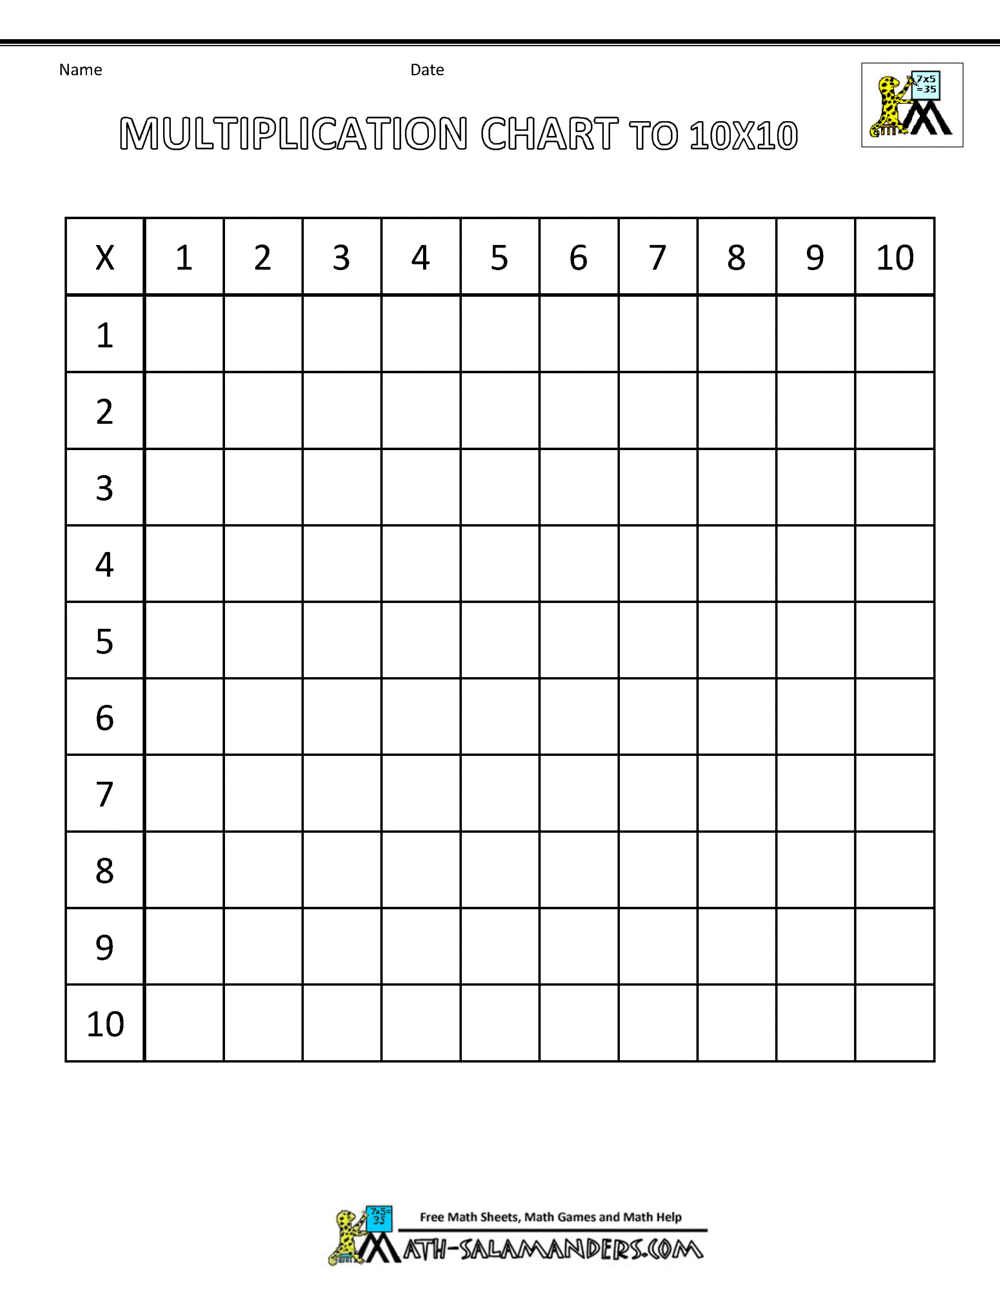 multiplication-chart-10x10-times-tables-grid-photos